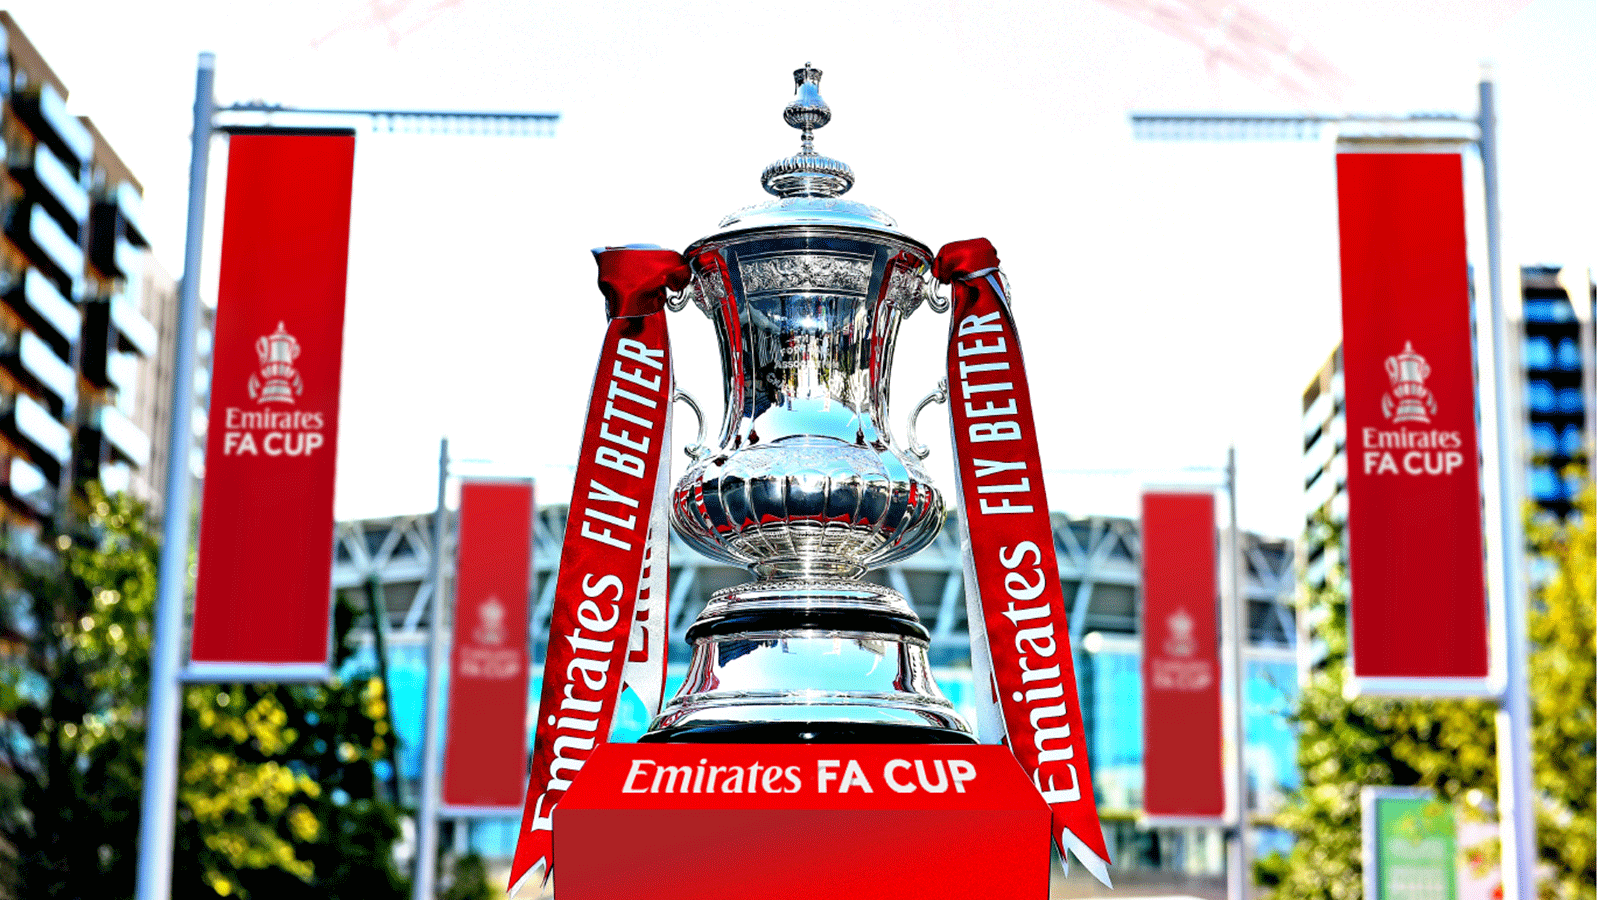 Emirates FA Cup Trophy